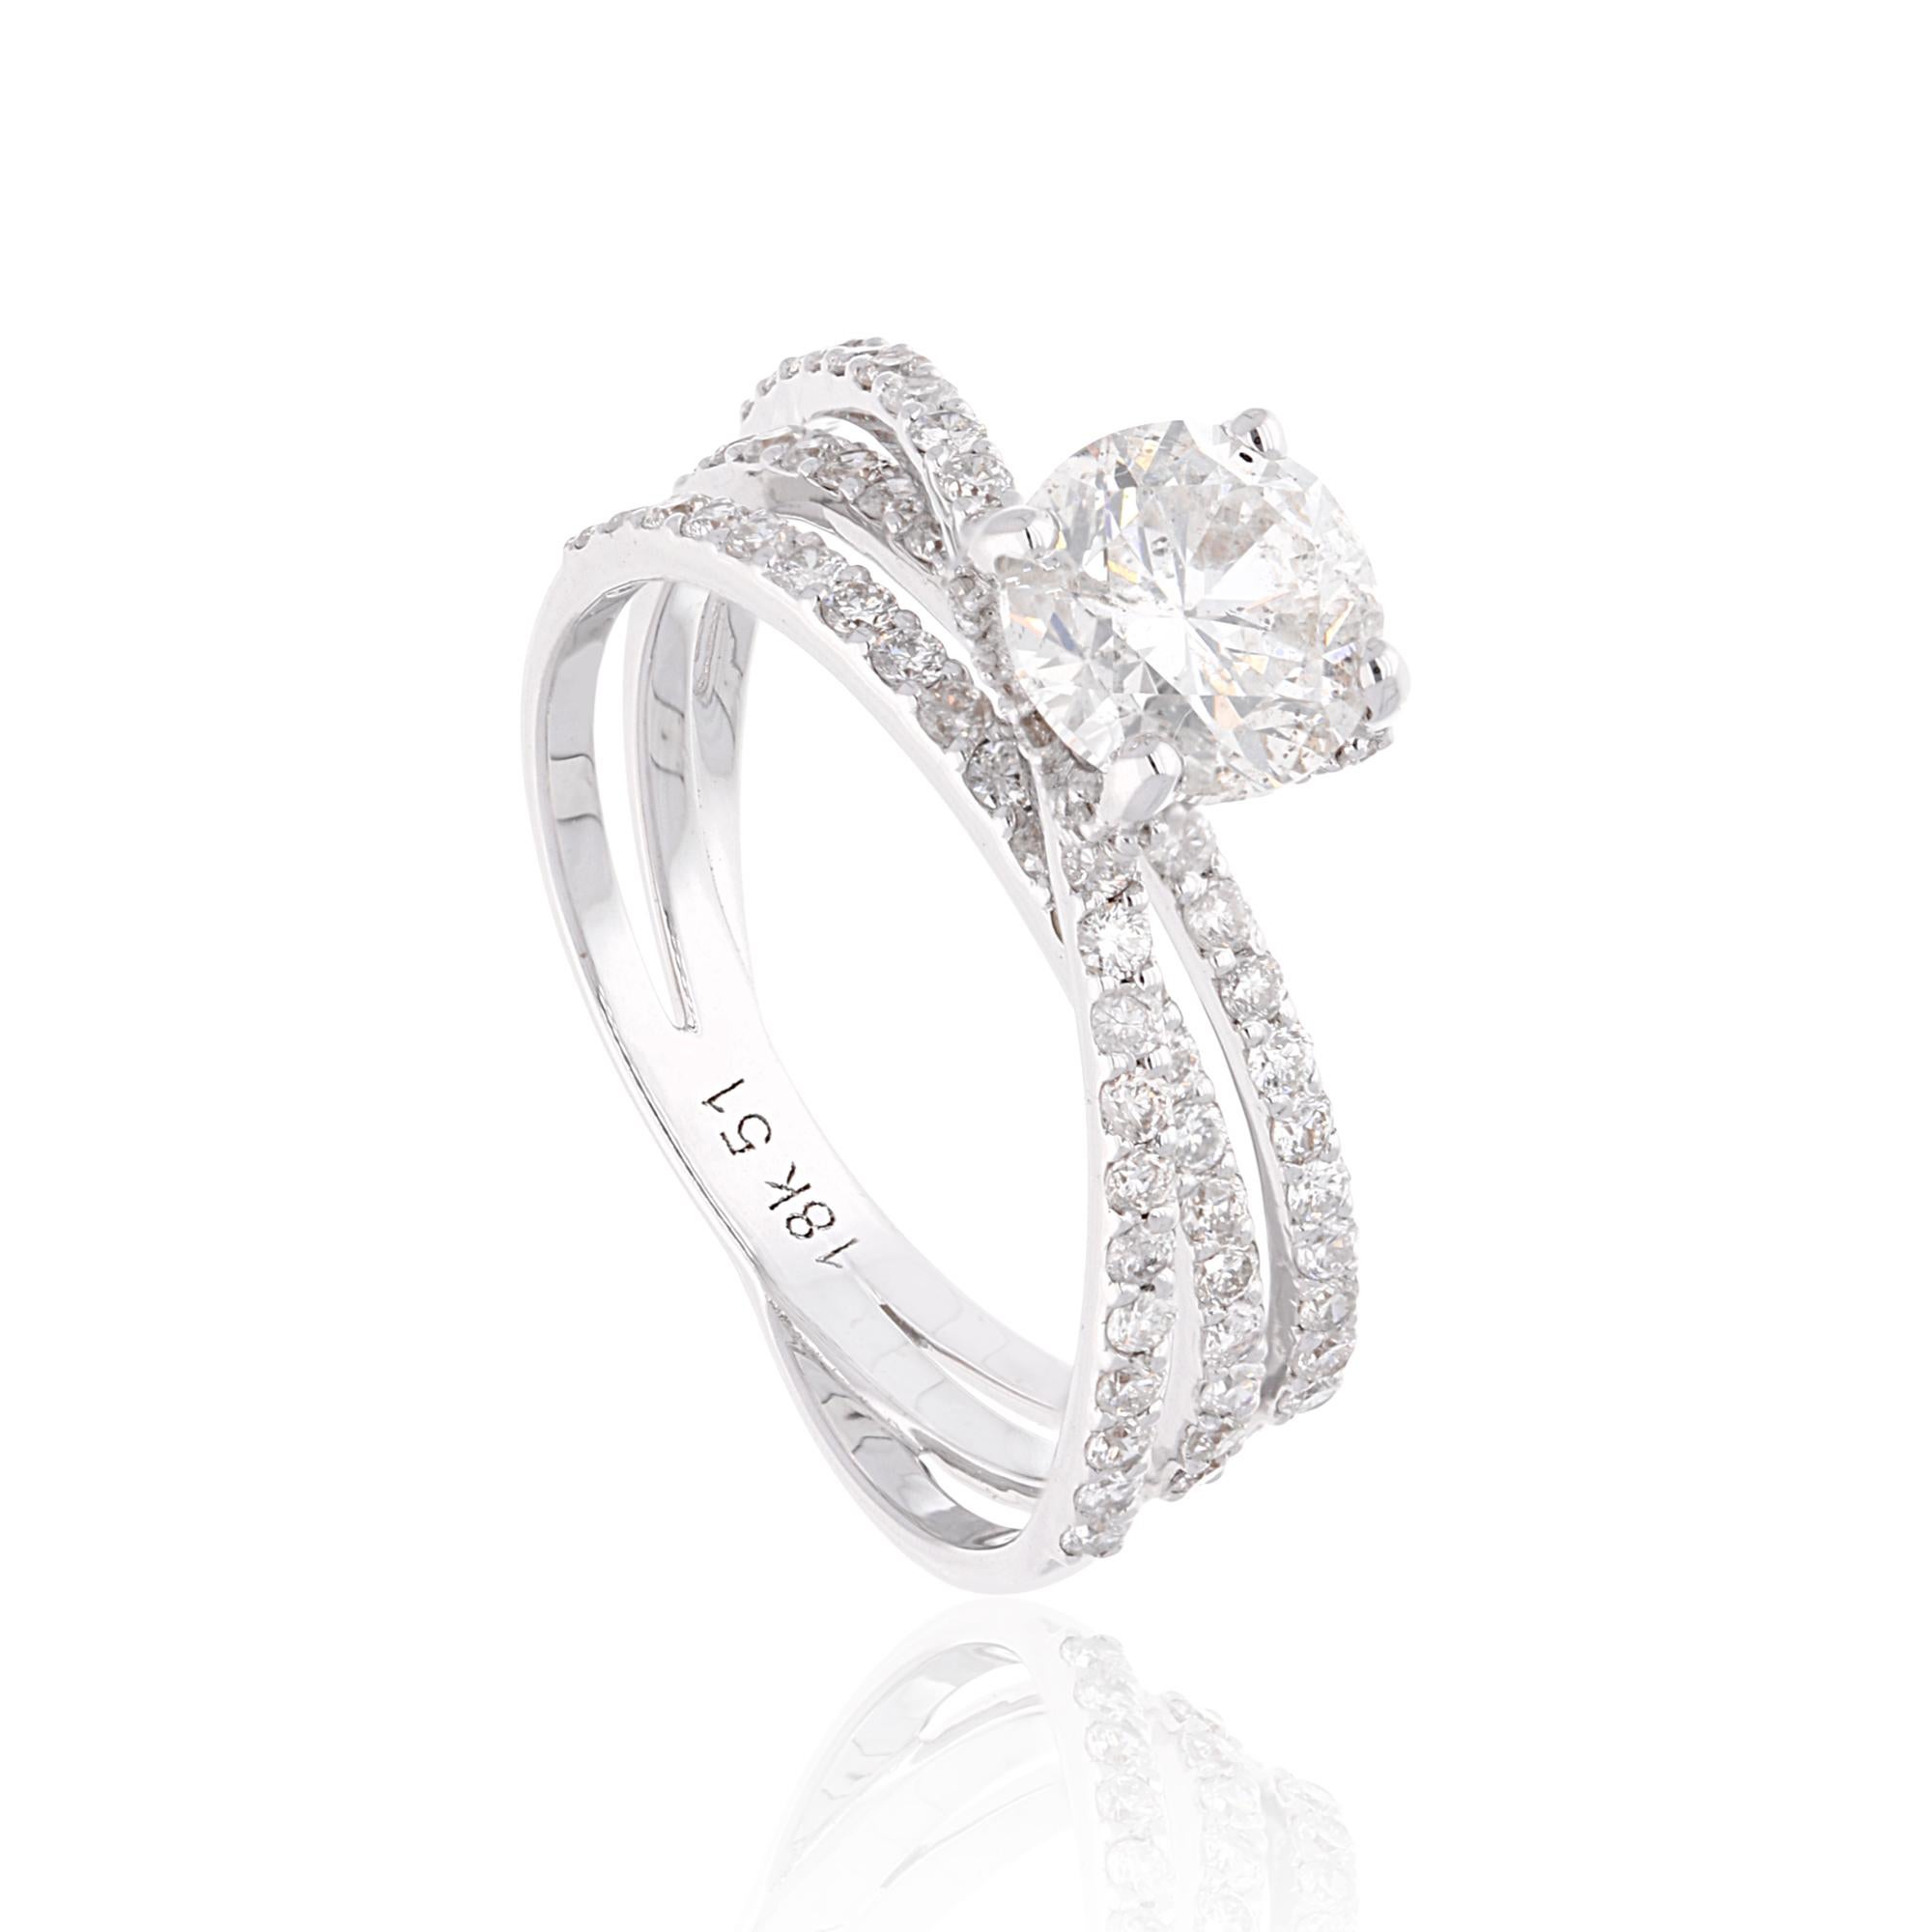 For Sale:  1.96 Carat SI Clarity HI Color Solitaire Diamond Band Ring 18 Karat White Gold 2